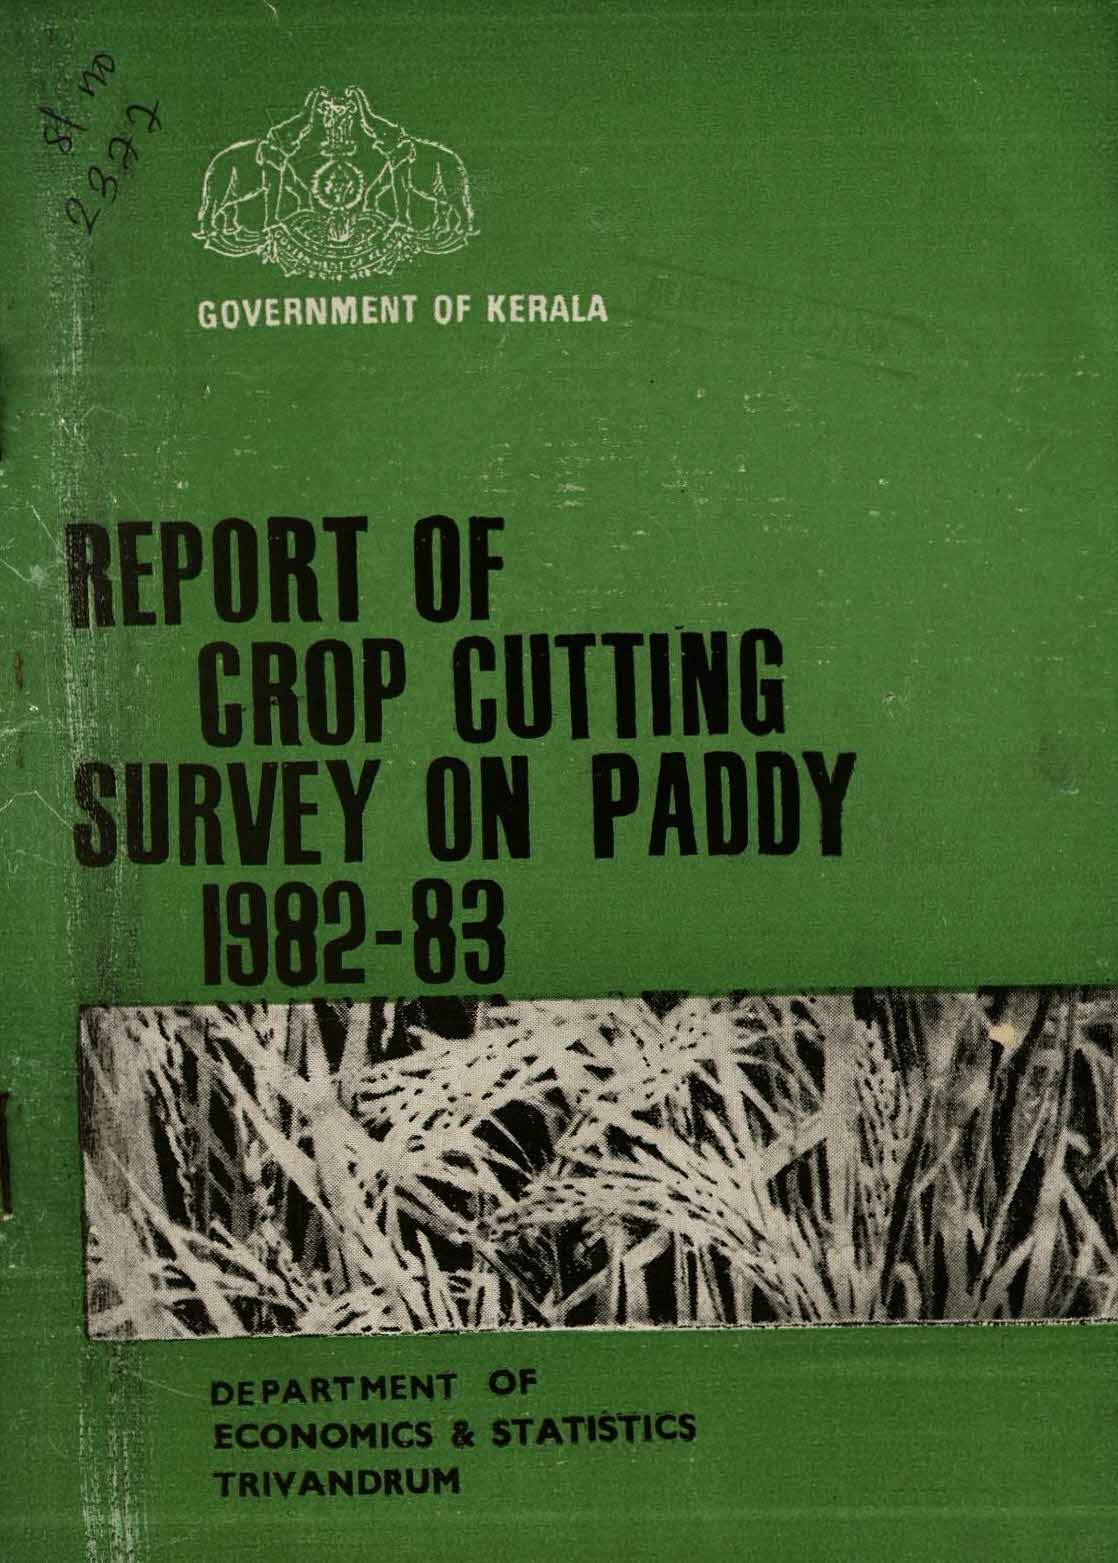 Report of Crop Cutting Survey on Paddy 1982-83